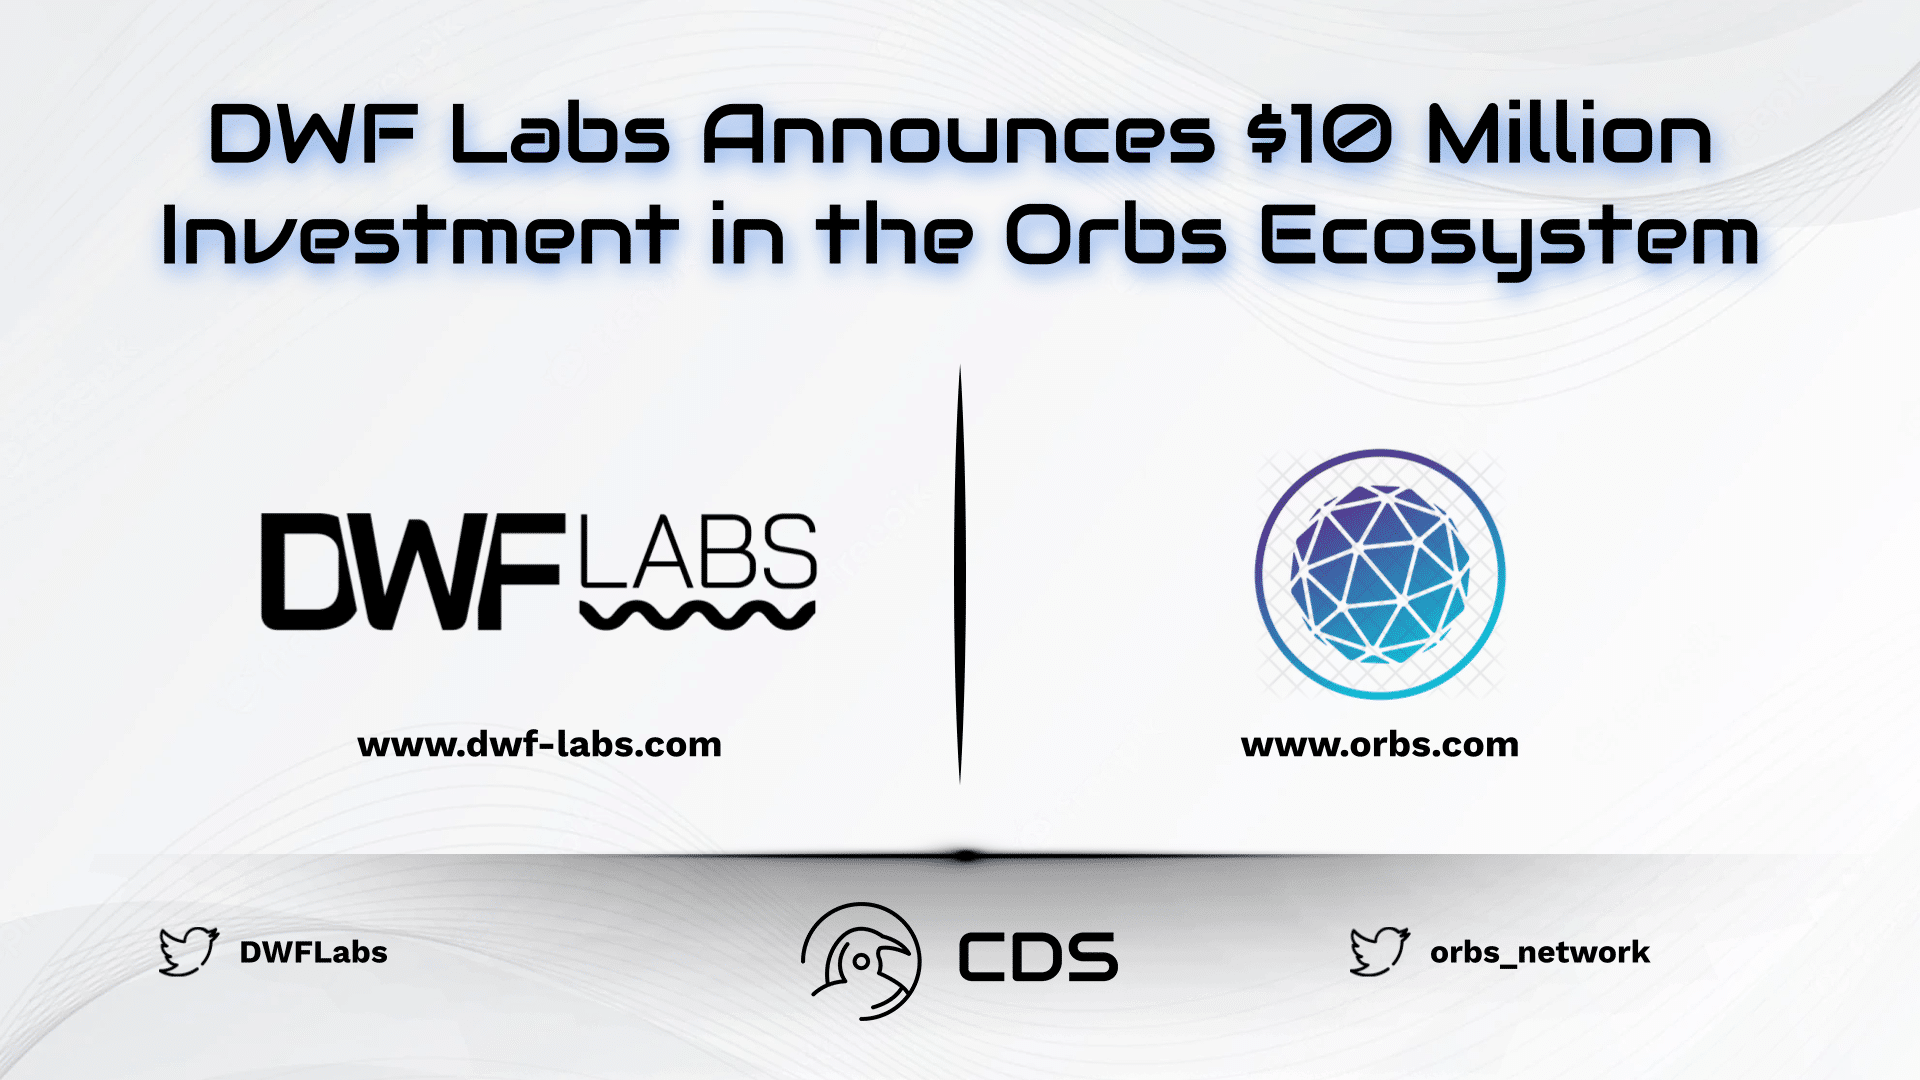 DWF Labs Announces $10 Million Investment in the Orbs Ecosystem